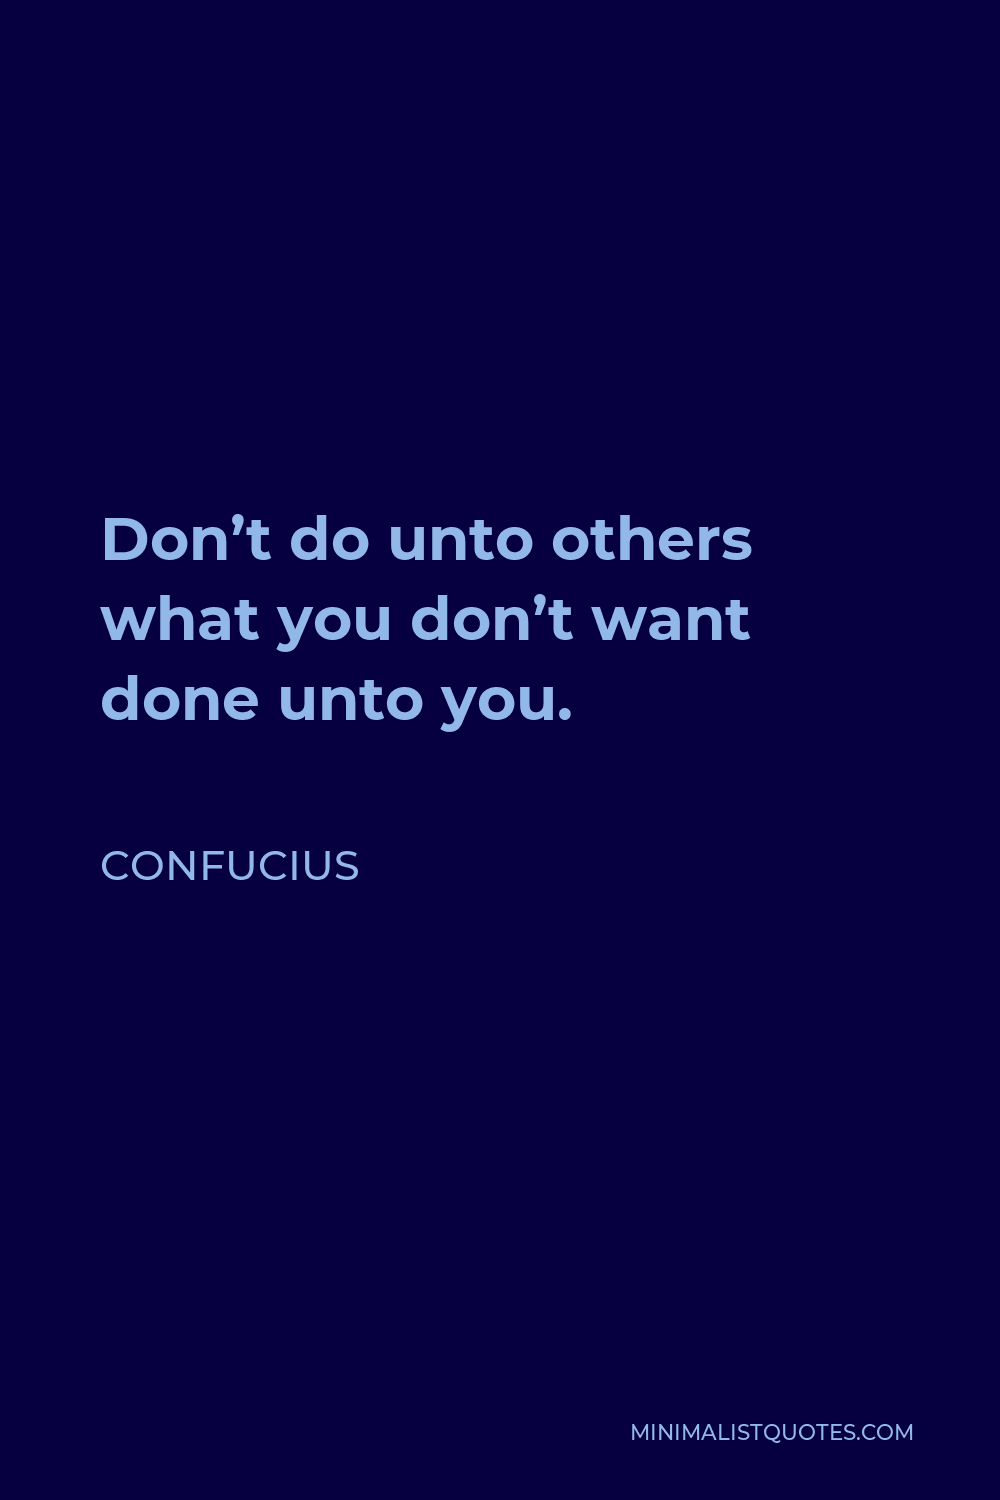 Confucius Quote - Don’t do unto others what you don’t want done unto you.